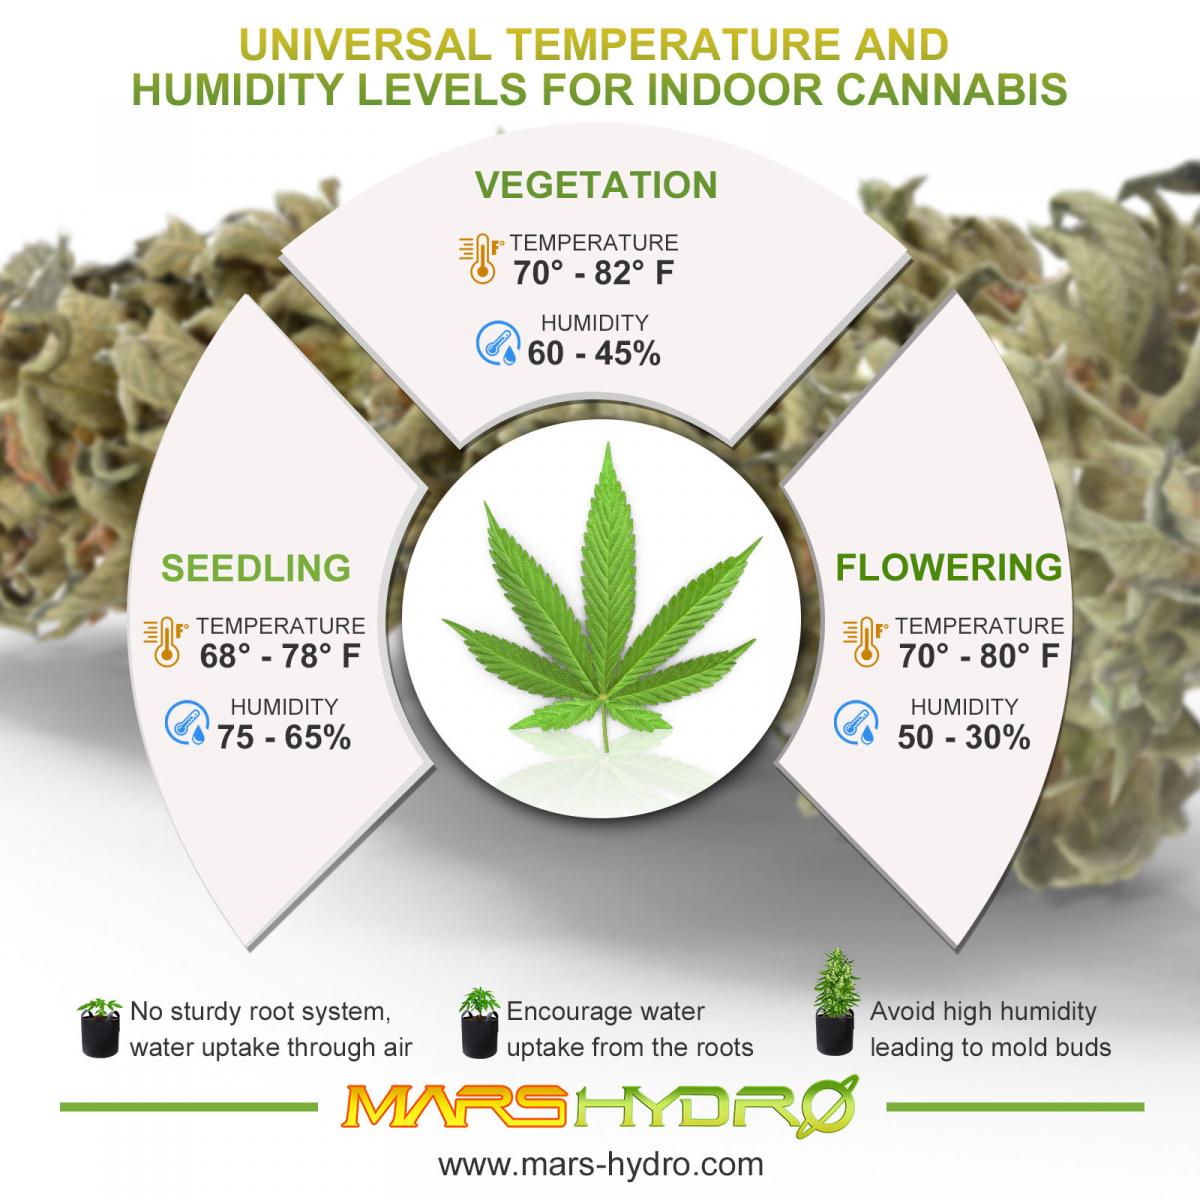 temperature and humidity levels for cannabis-mars hydro.jpg - Click image for larger version  Name:	temperature and humidity levels for cannabis-mars hydro.jpg Views:	0 Size:	141.2 KB ID:	18048997